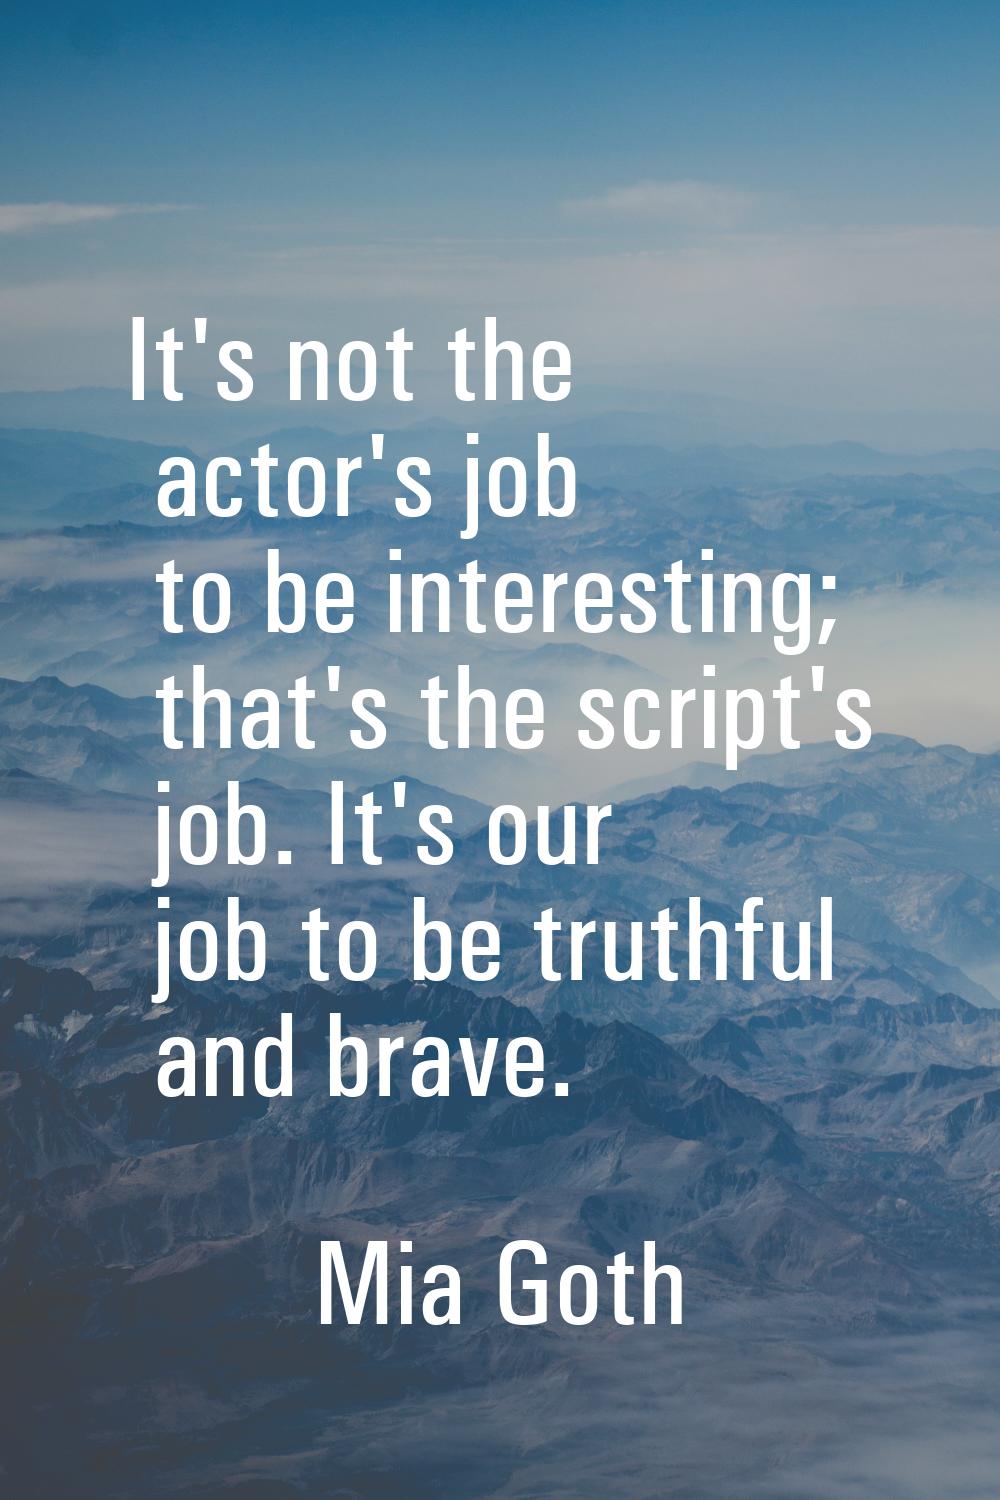 It's not the actor's job to be interesting; that's the script's job. It's our job to be truthful an